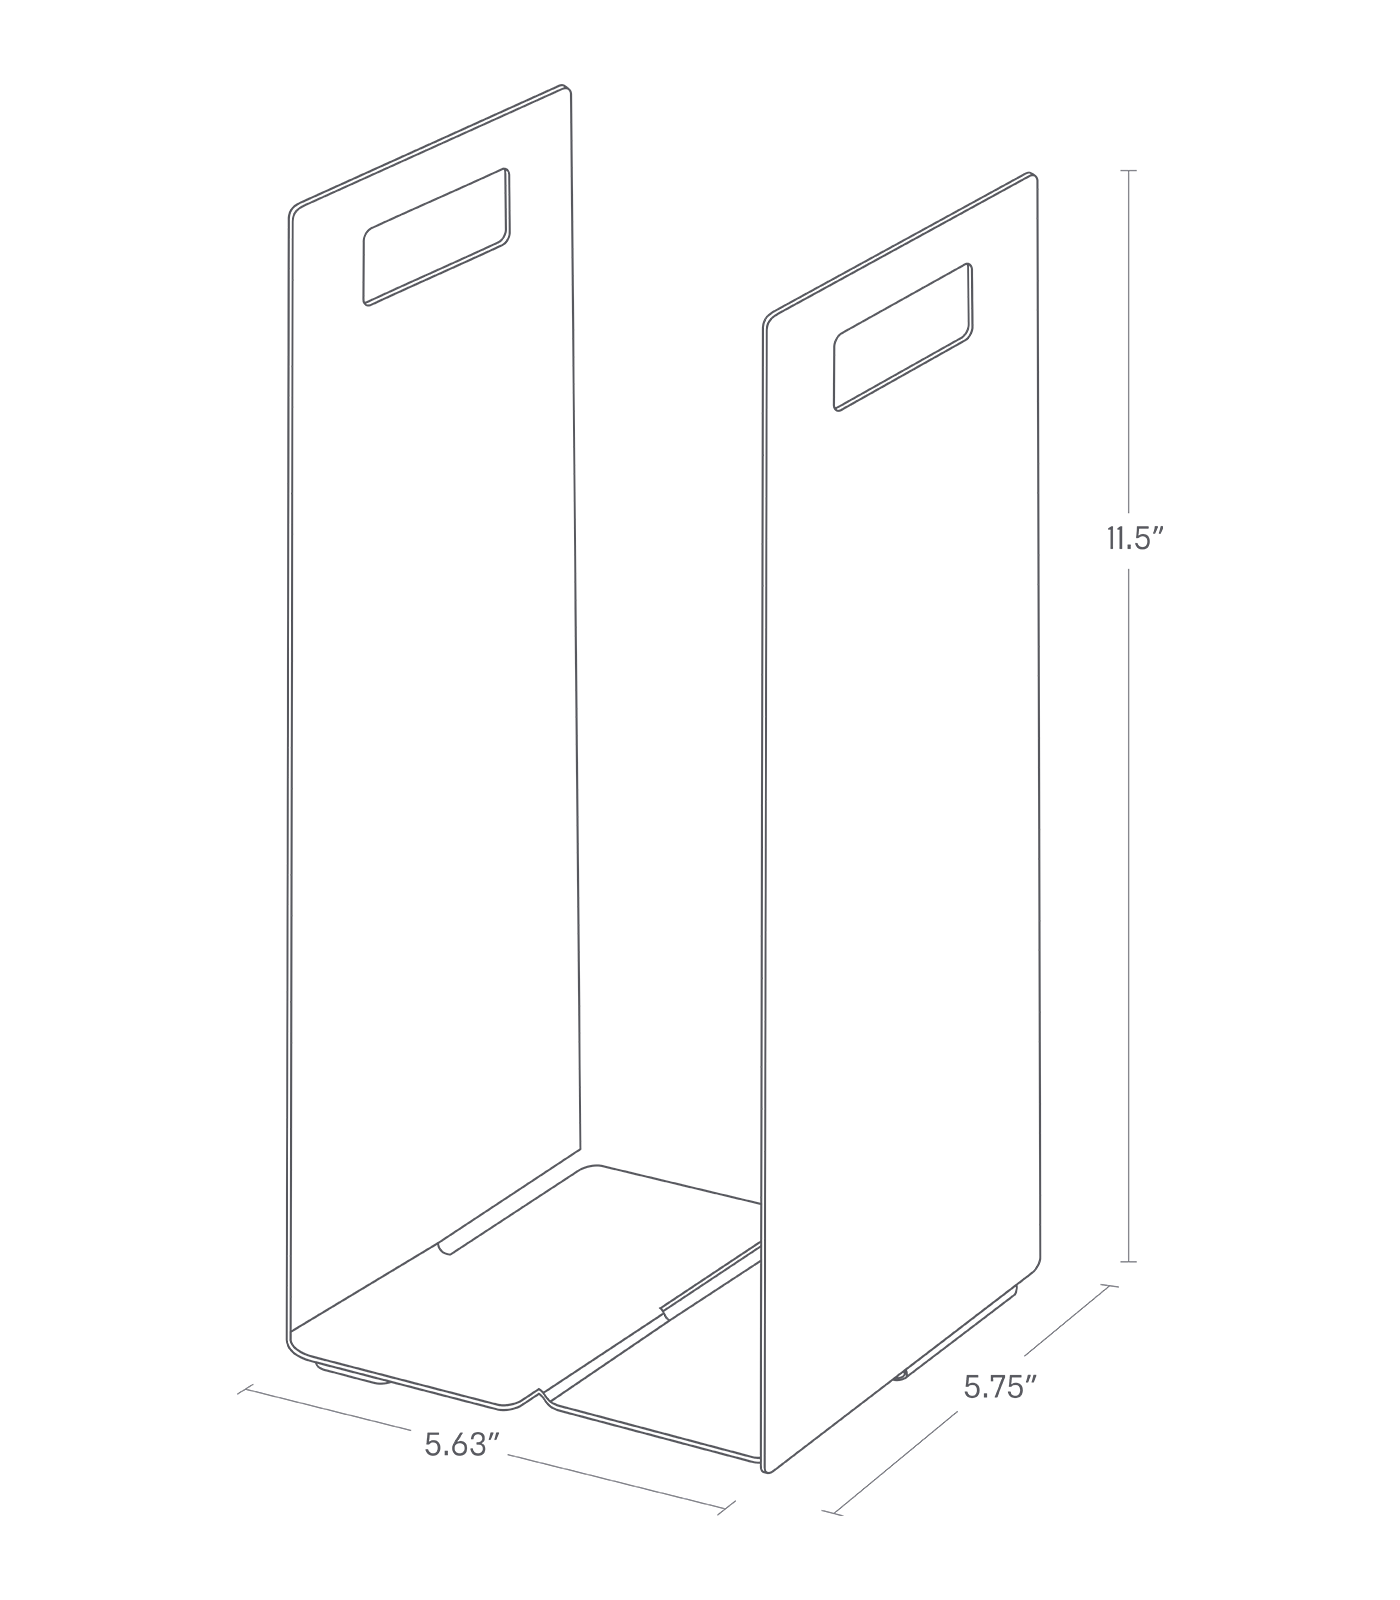 Dimenision image for Towel Storage Organizeron a white background showing total width of 5.63